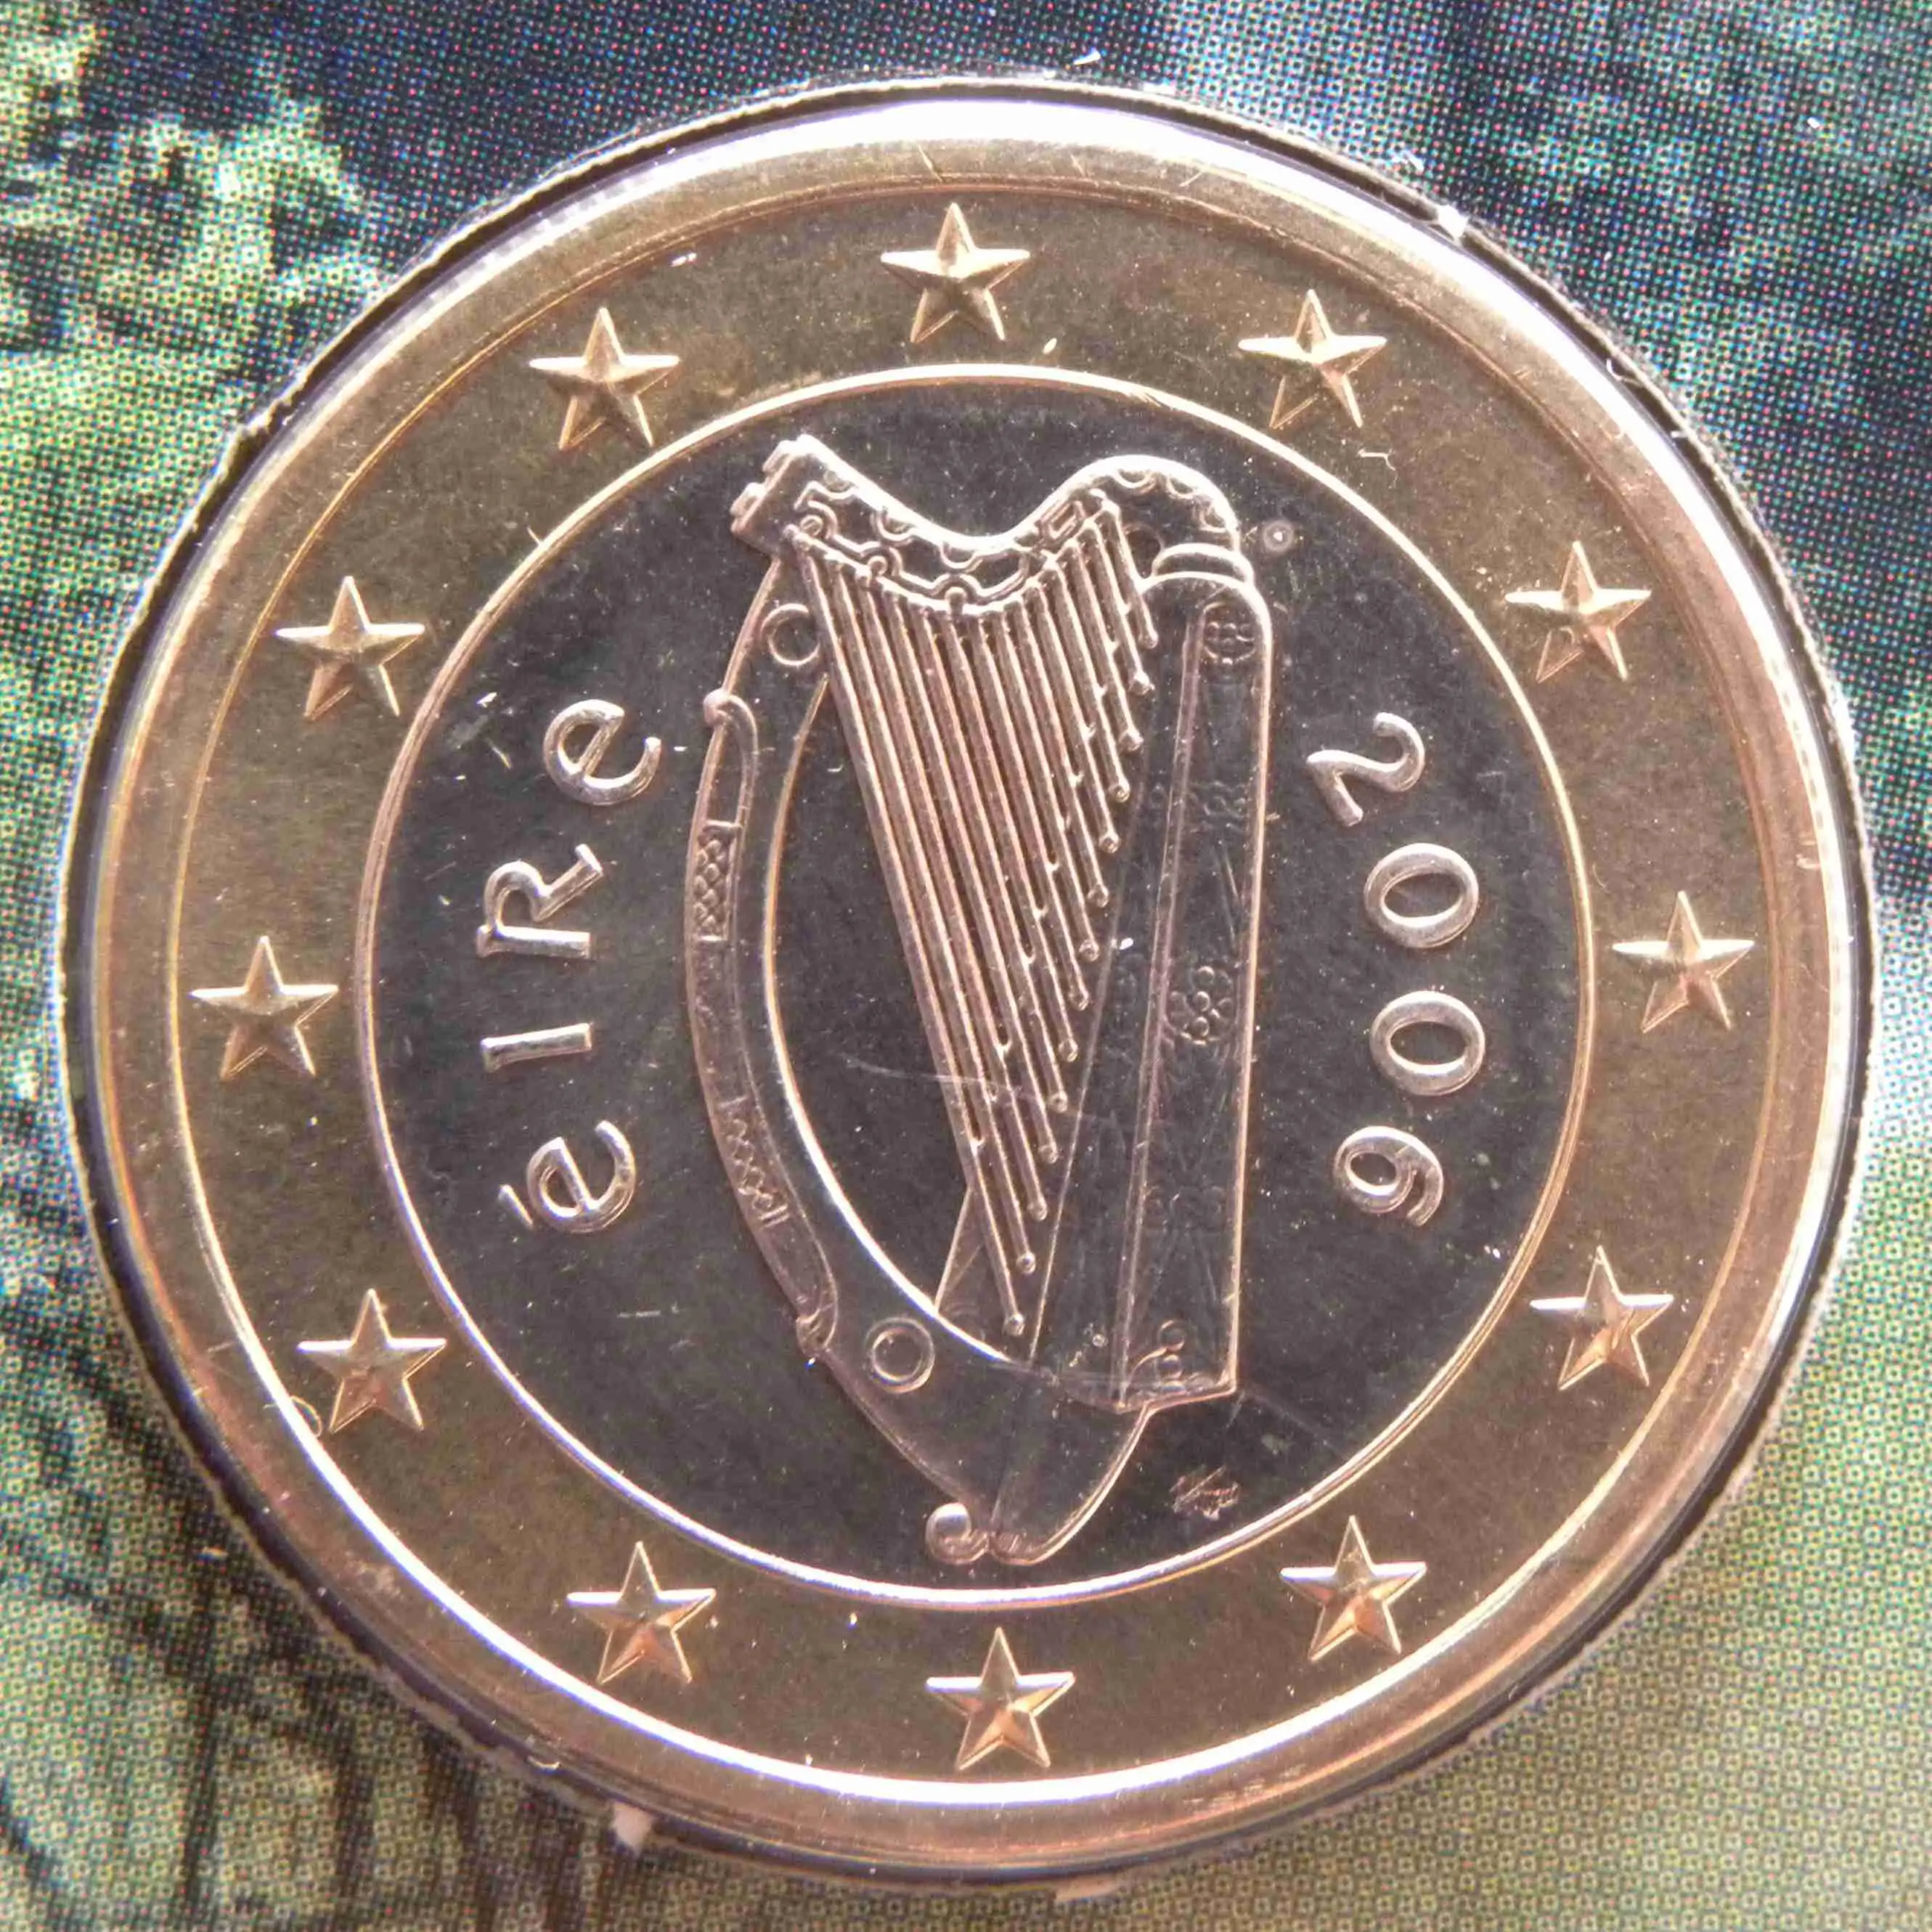 Ireland Euro Coins UNC 2006 ᐅ Value, Mintage and Images at ...